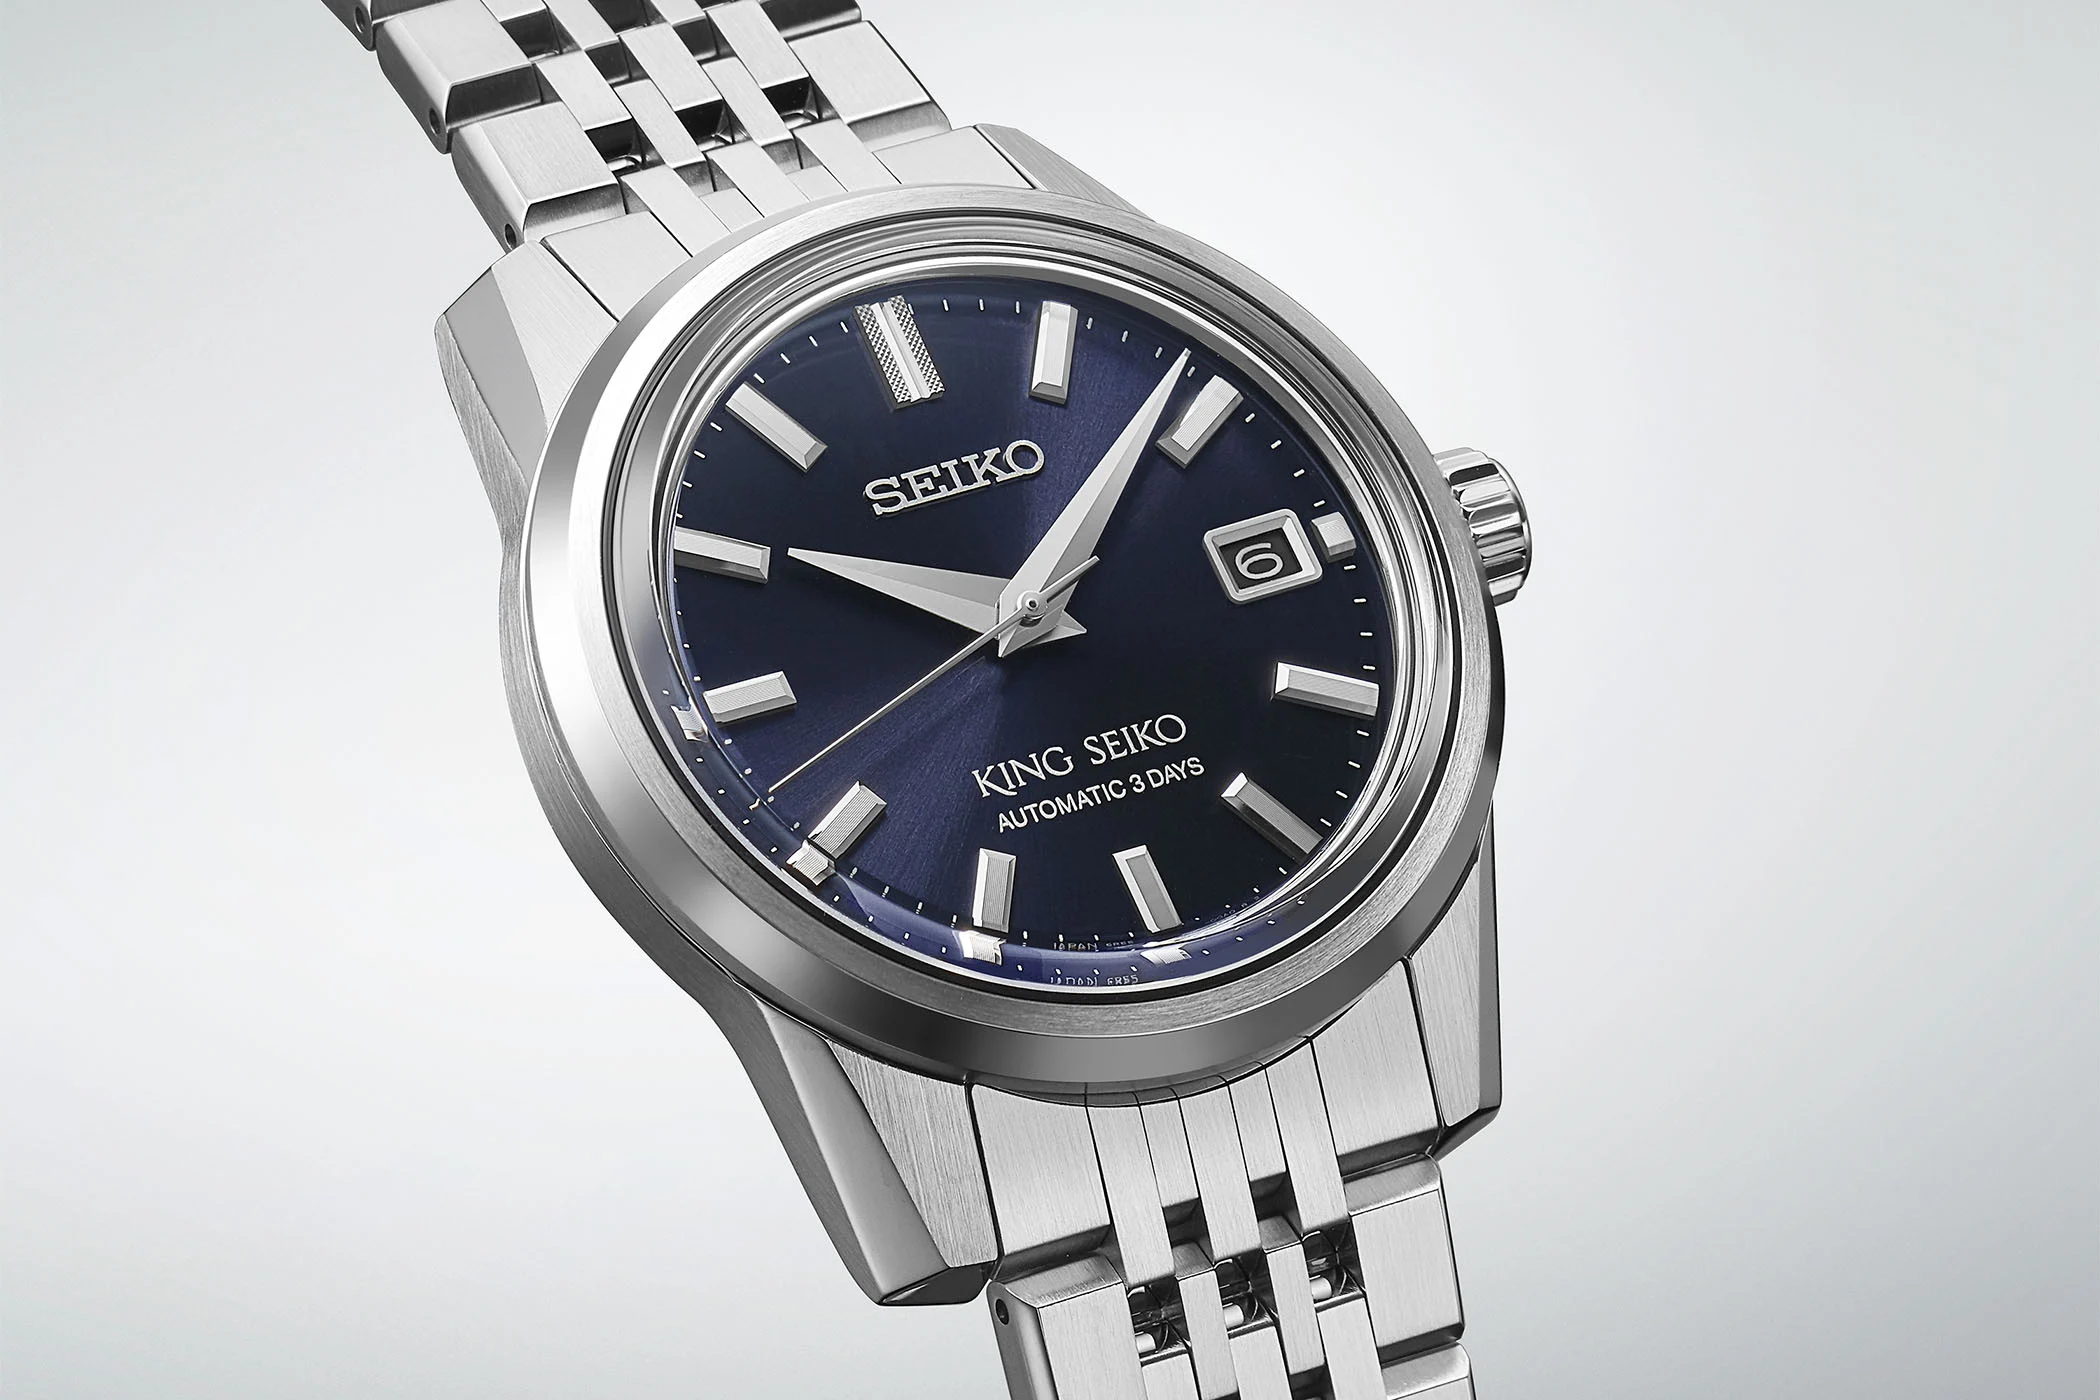 Introducing The New King Seiko 39mm Date Watch Collection